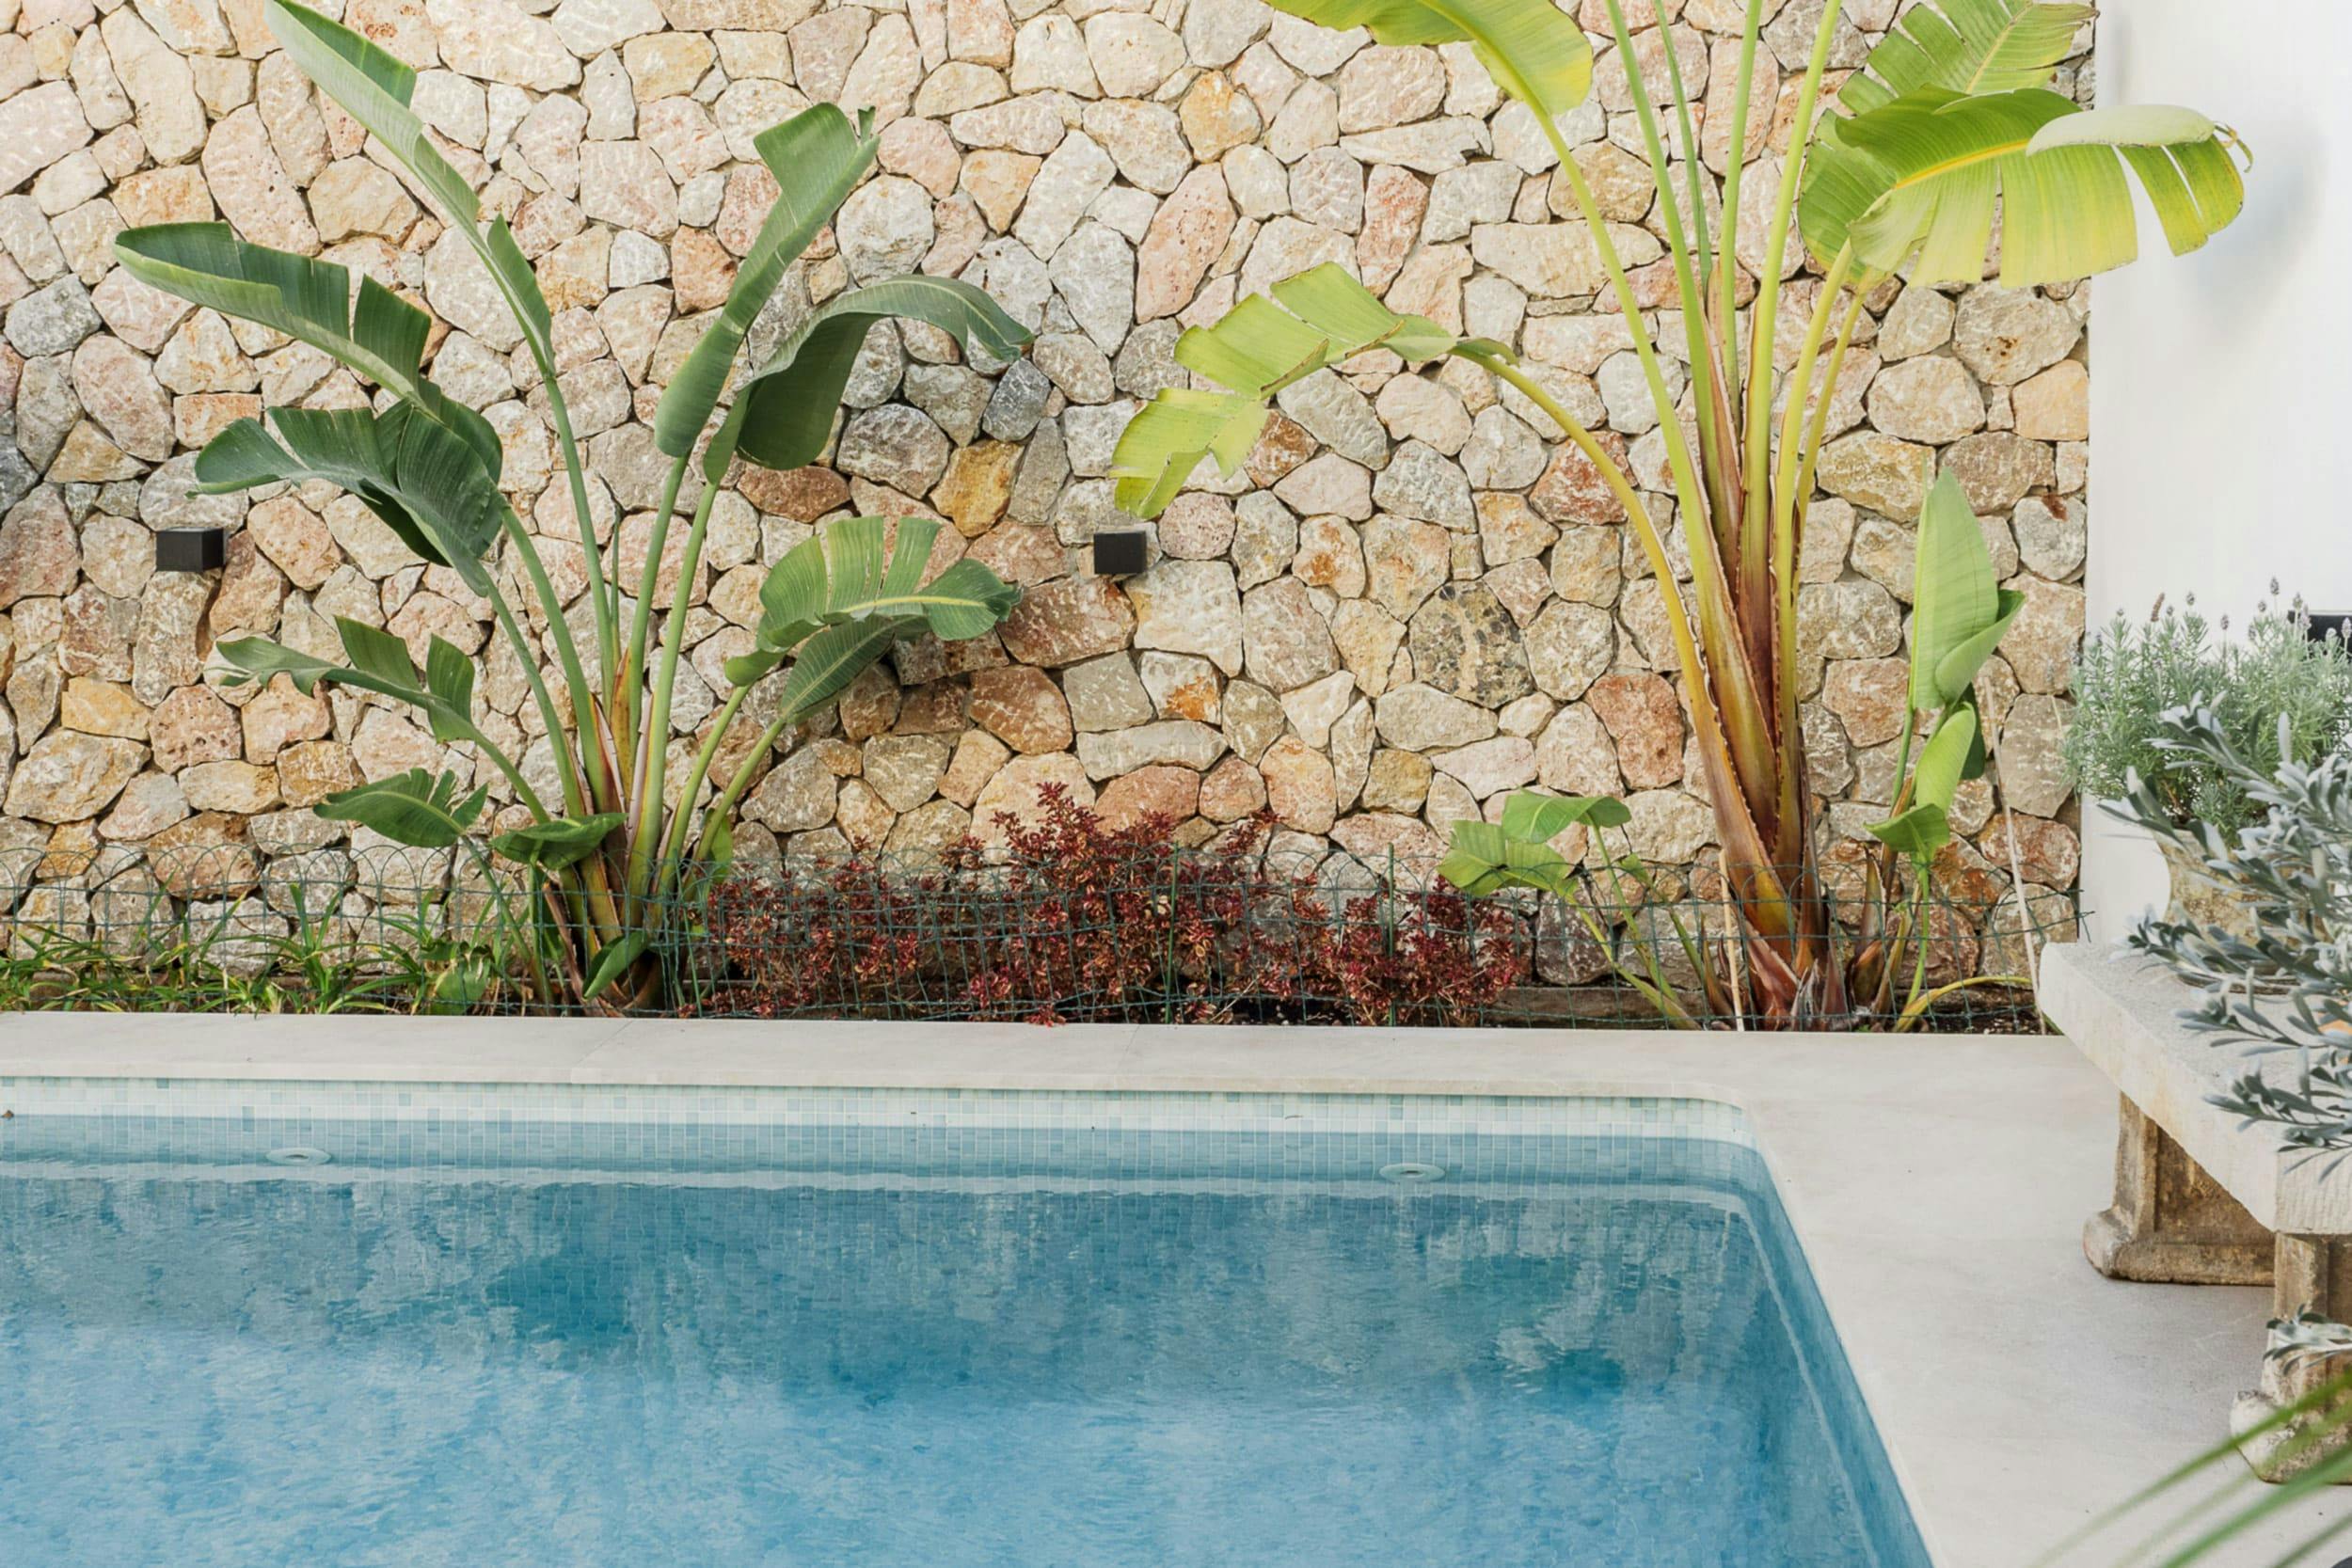 The image features a large, blue swimming pool with a stone wall and a stone fence, surrounded by a lush garden with various plants and potted plants.